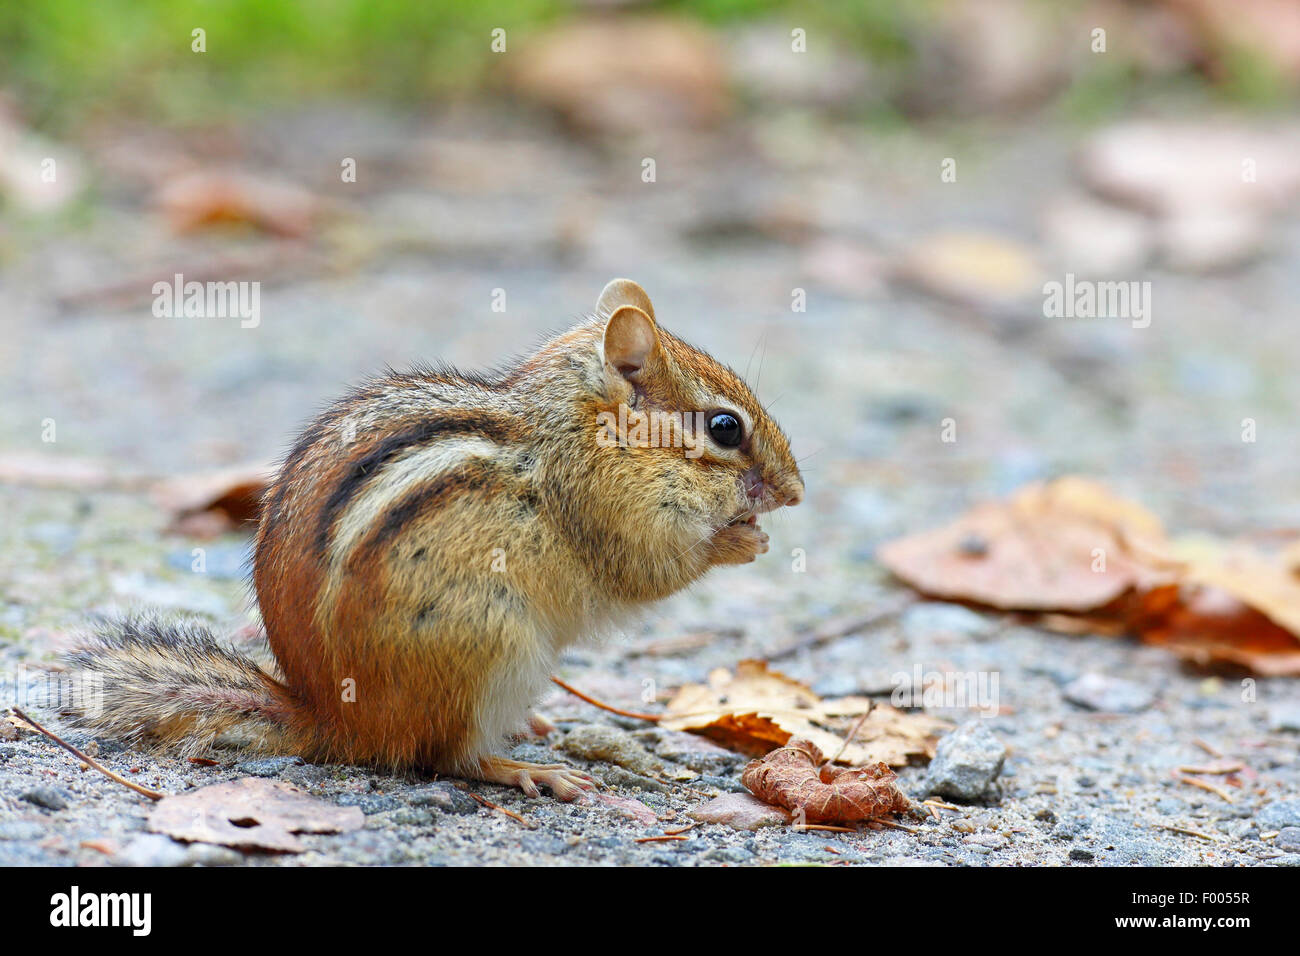 Eastern American chipmunk (Tamias striatus), eating on the ground, Canada, Ontario, Algonquin Provincial Park Stock Photo